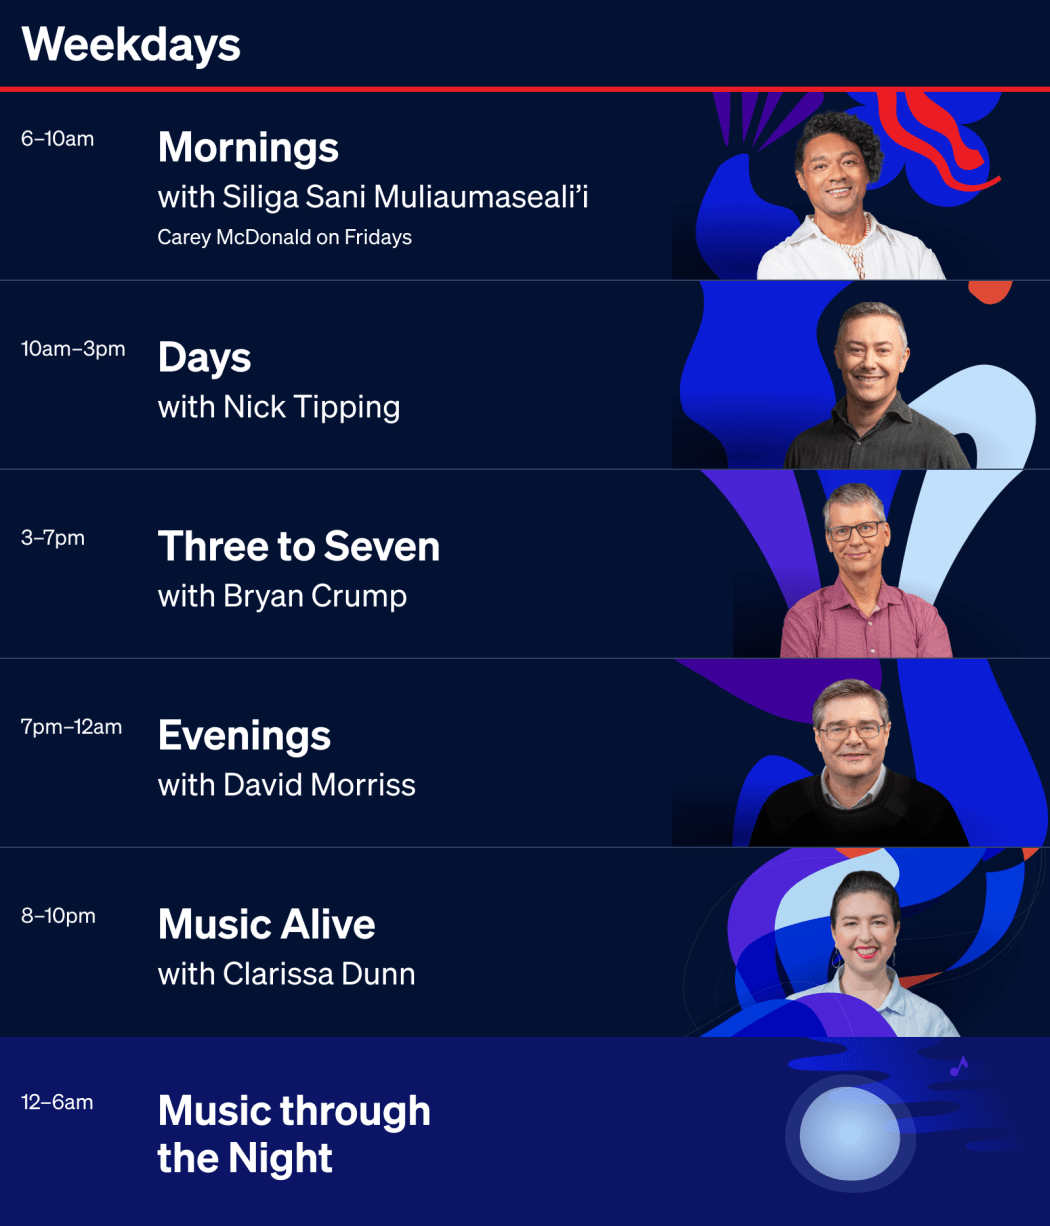 Weekdays on RNZ Concert:
6-10am Mornings with Siliga Sani Muliaumaseali'i / Carey McDonald on Fridays
10am-3pm Days with Nick Tipping
3-7pm Three to Seven with Bryan Crump
7pm-12am Evenings with David Morriss
8-10pm Music Alive with Clarissa Dunn
12-6am Music through the Night